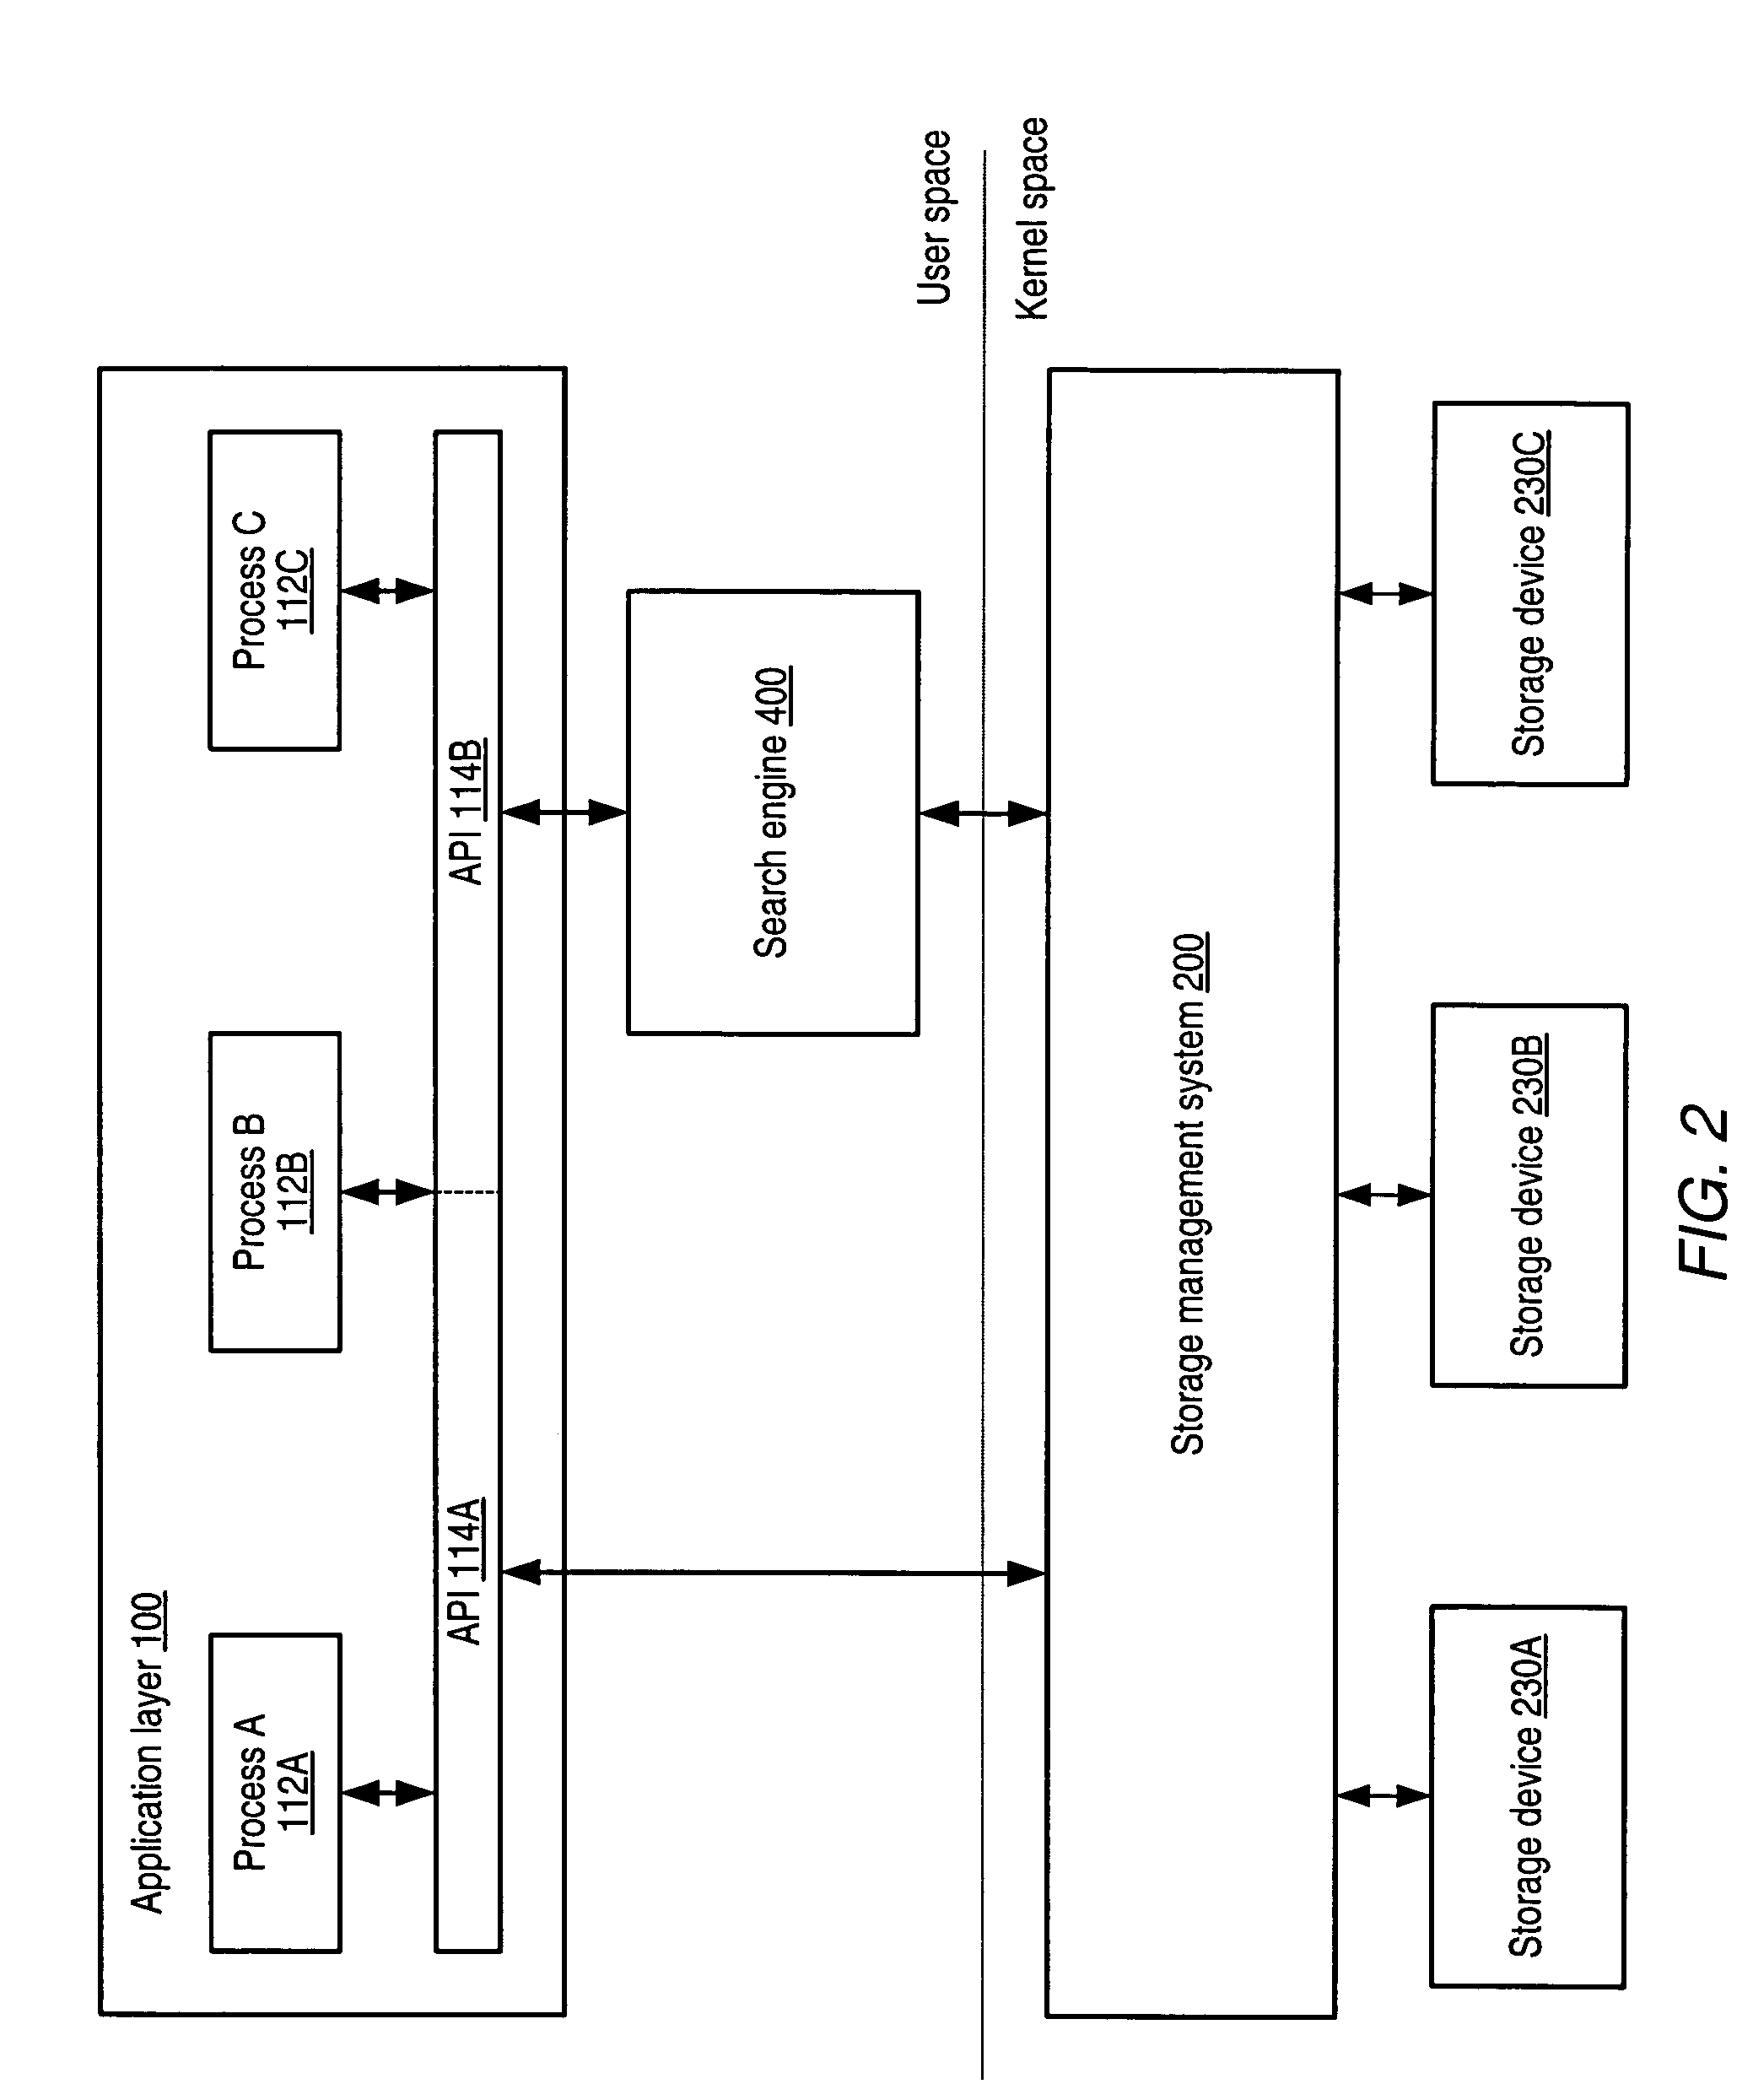 System and method for selectively indexing file system content